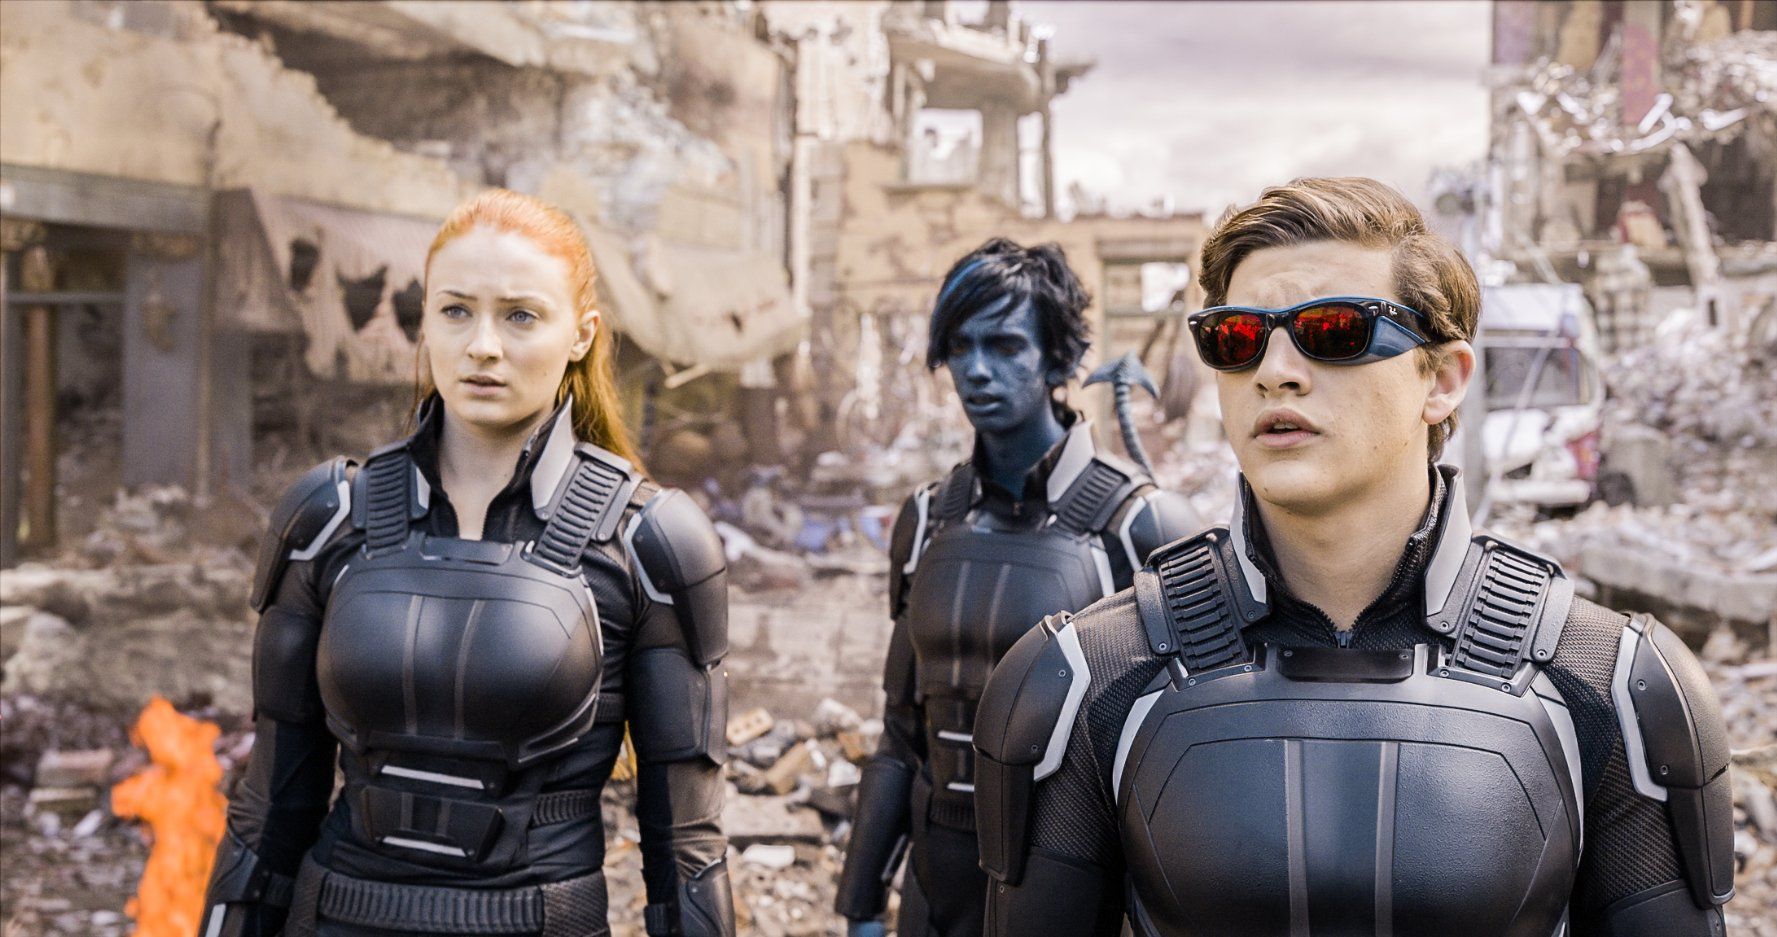 The Next X Men Movie Will Be A Do Over Of The Worst X Men Movie